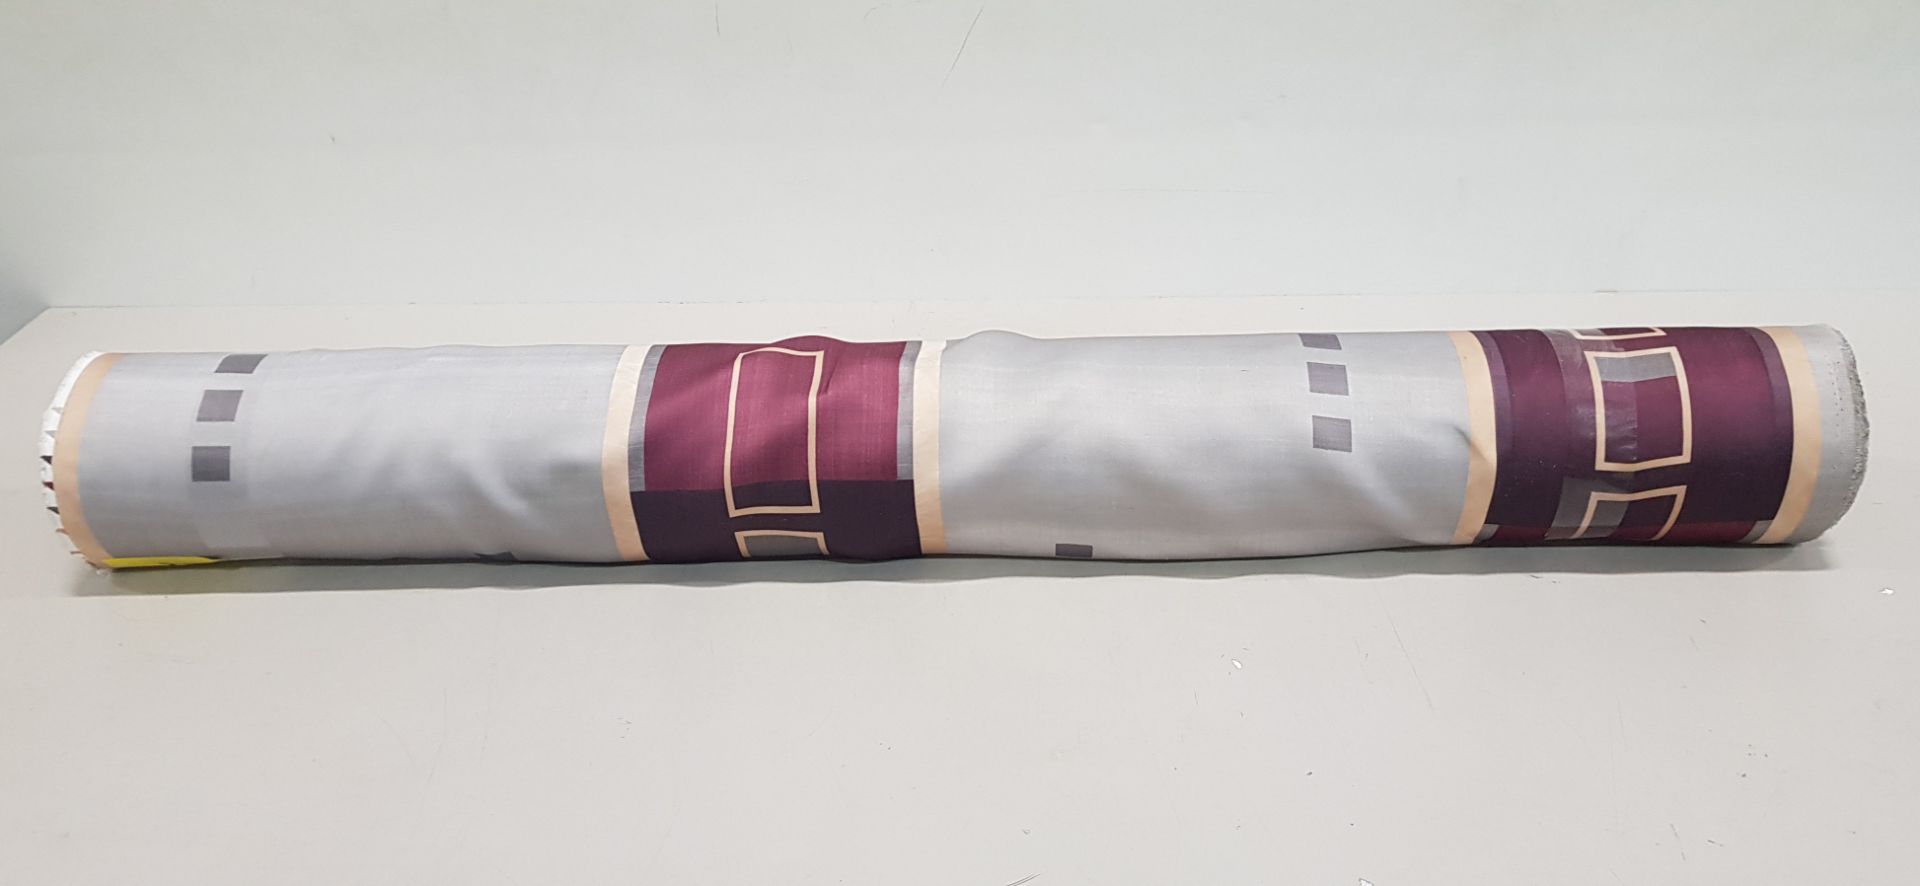 1 X ROLL OF FABRIC IN GREY AND RED SQUARE BOXE'S DESIGN - THE LENGTH 40M - £12.99 / M - TOTAL £519.